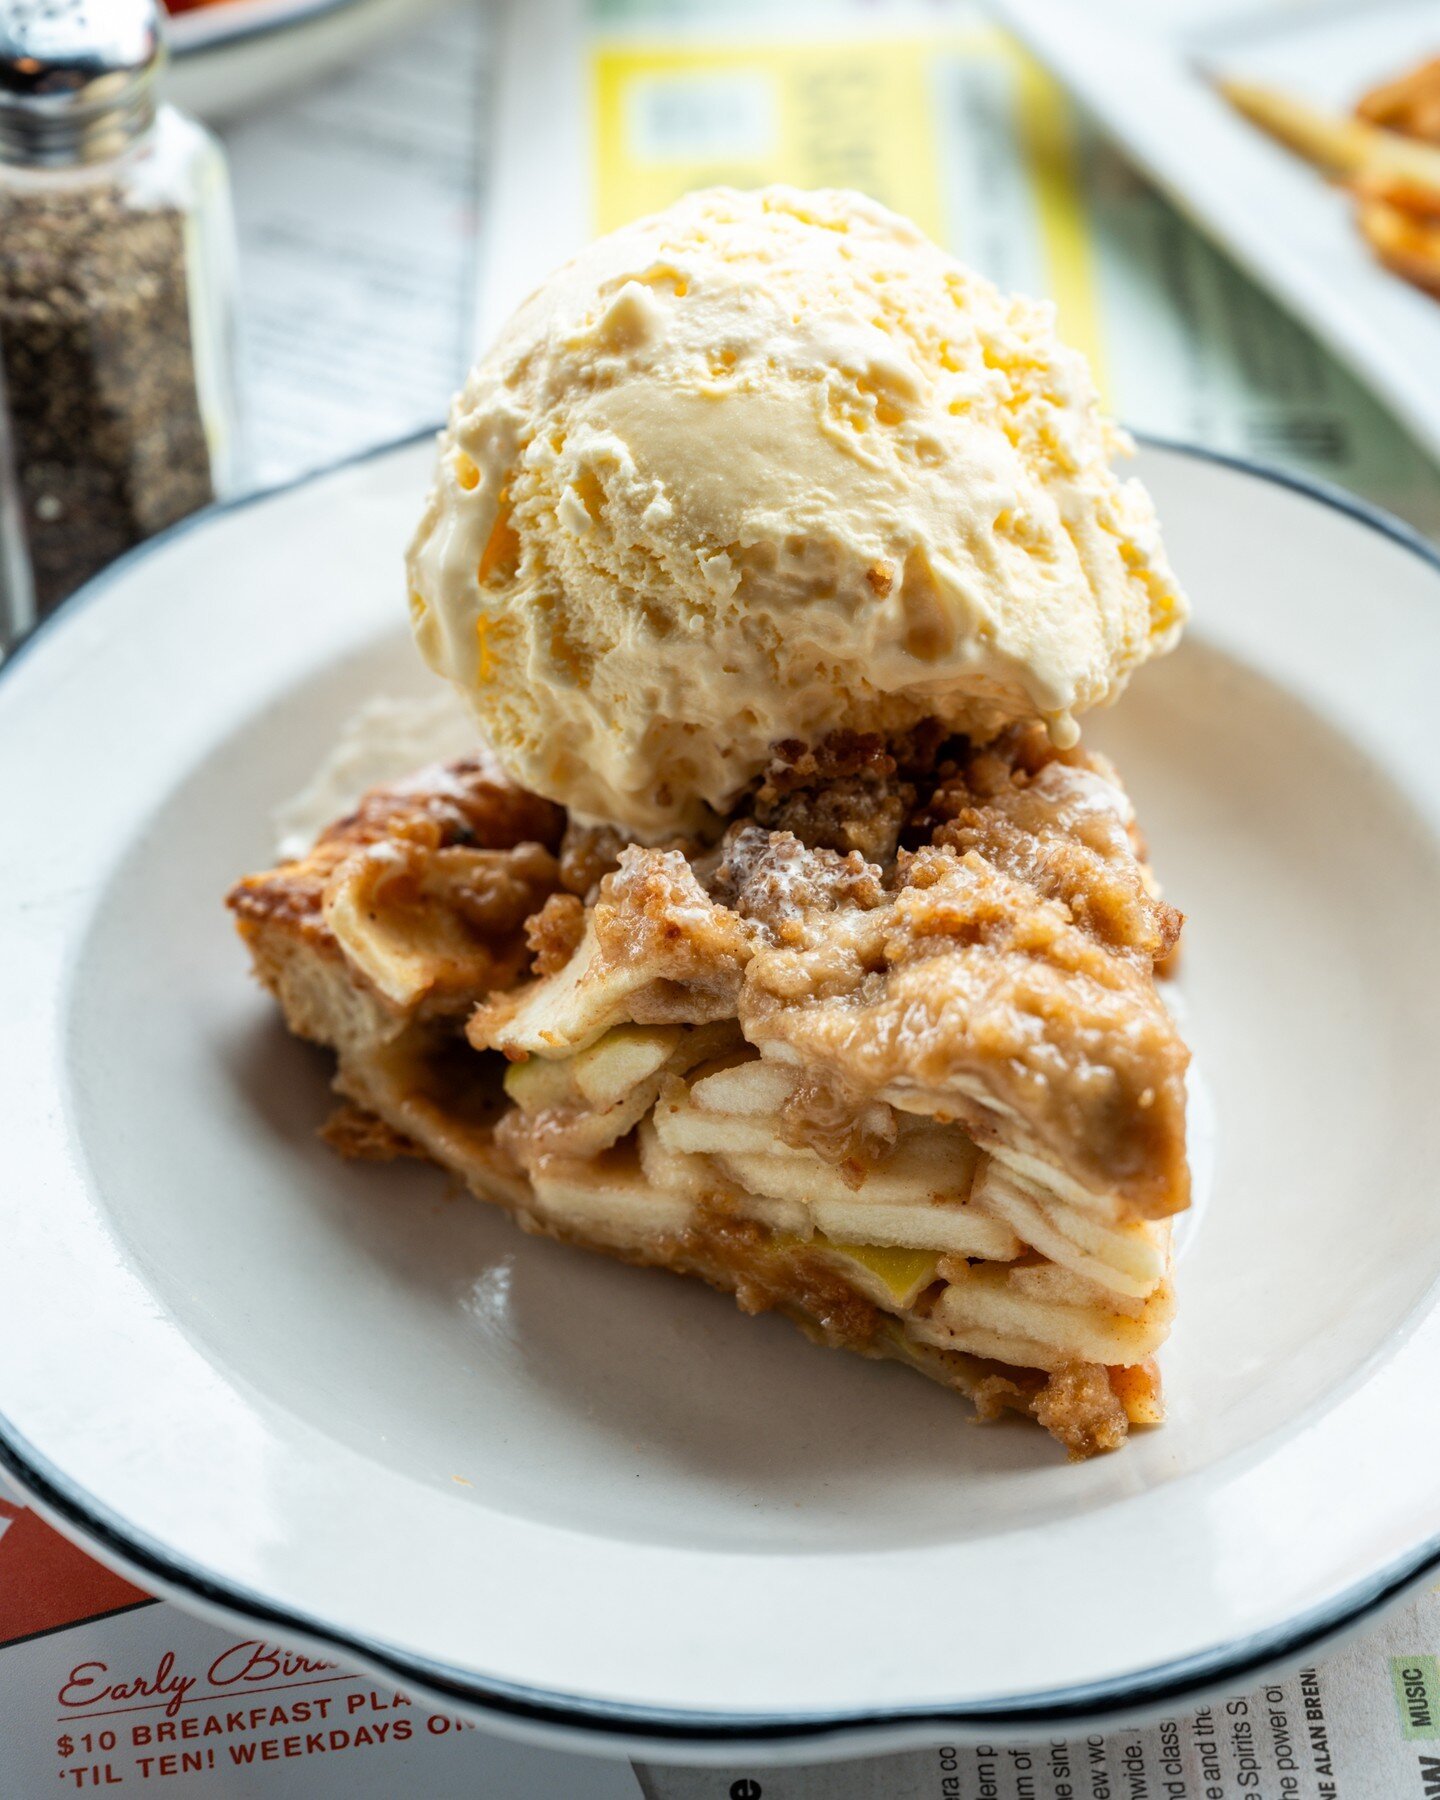 A crisp slice of 𝑨𝒑𝒑𝒍𝒆 𝑷𝒊𝒆 on #PiDay can only be made better 𝘢 𝘭𝘢 𝘮𝘰𝘥𝘦! 🍏𝛑

#PieDay #ApplePie #ALaMode #SupportLocal #AustinFoodie #EatDrinkAustin #LamarBlvd #DowntownAustin #24Diner